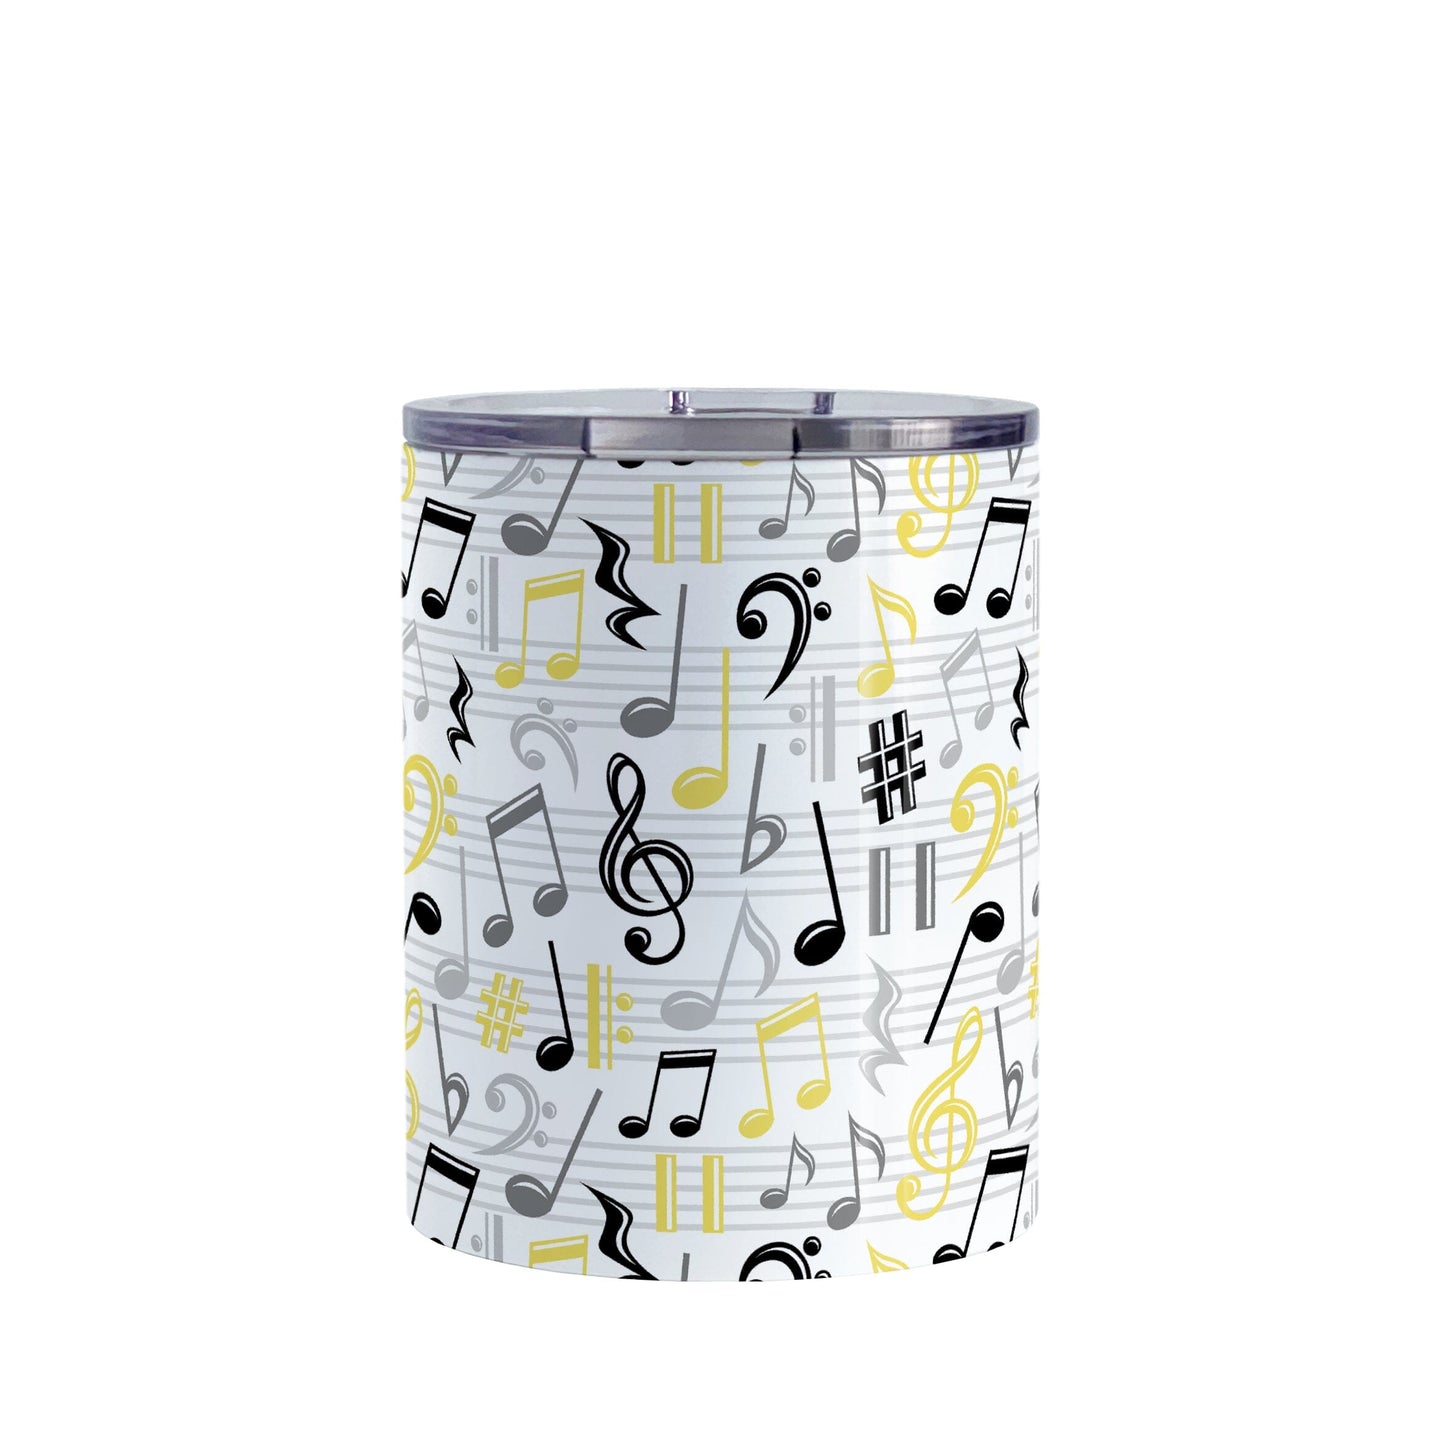 Yellow Music Notes Pattern Tumbler Cup (10oz) at Amy's Coffee Mugs. A stainless steel tumbler cup designed with music notes and symbols in yellow, black, and gray in a pattern that wraps around the cup.